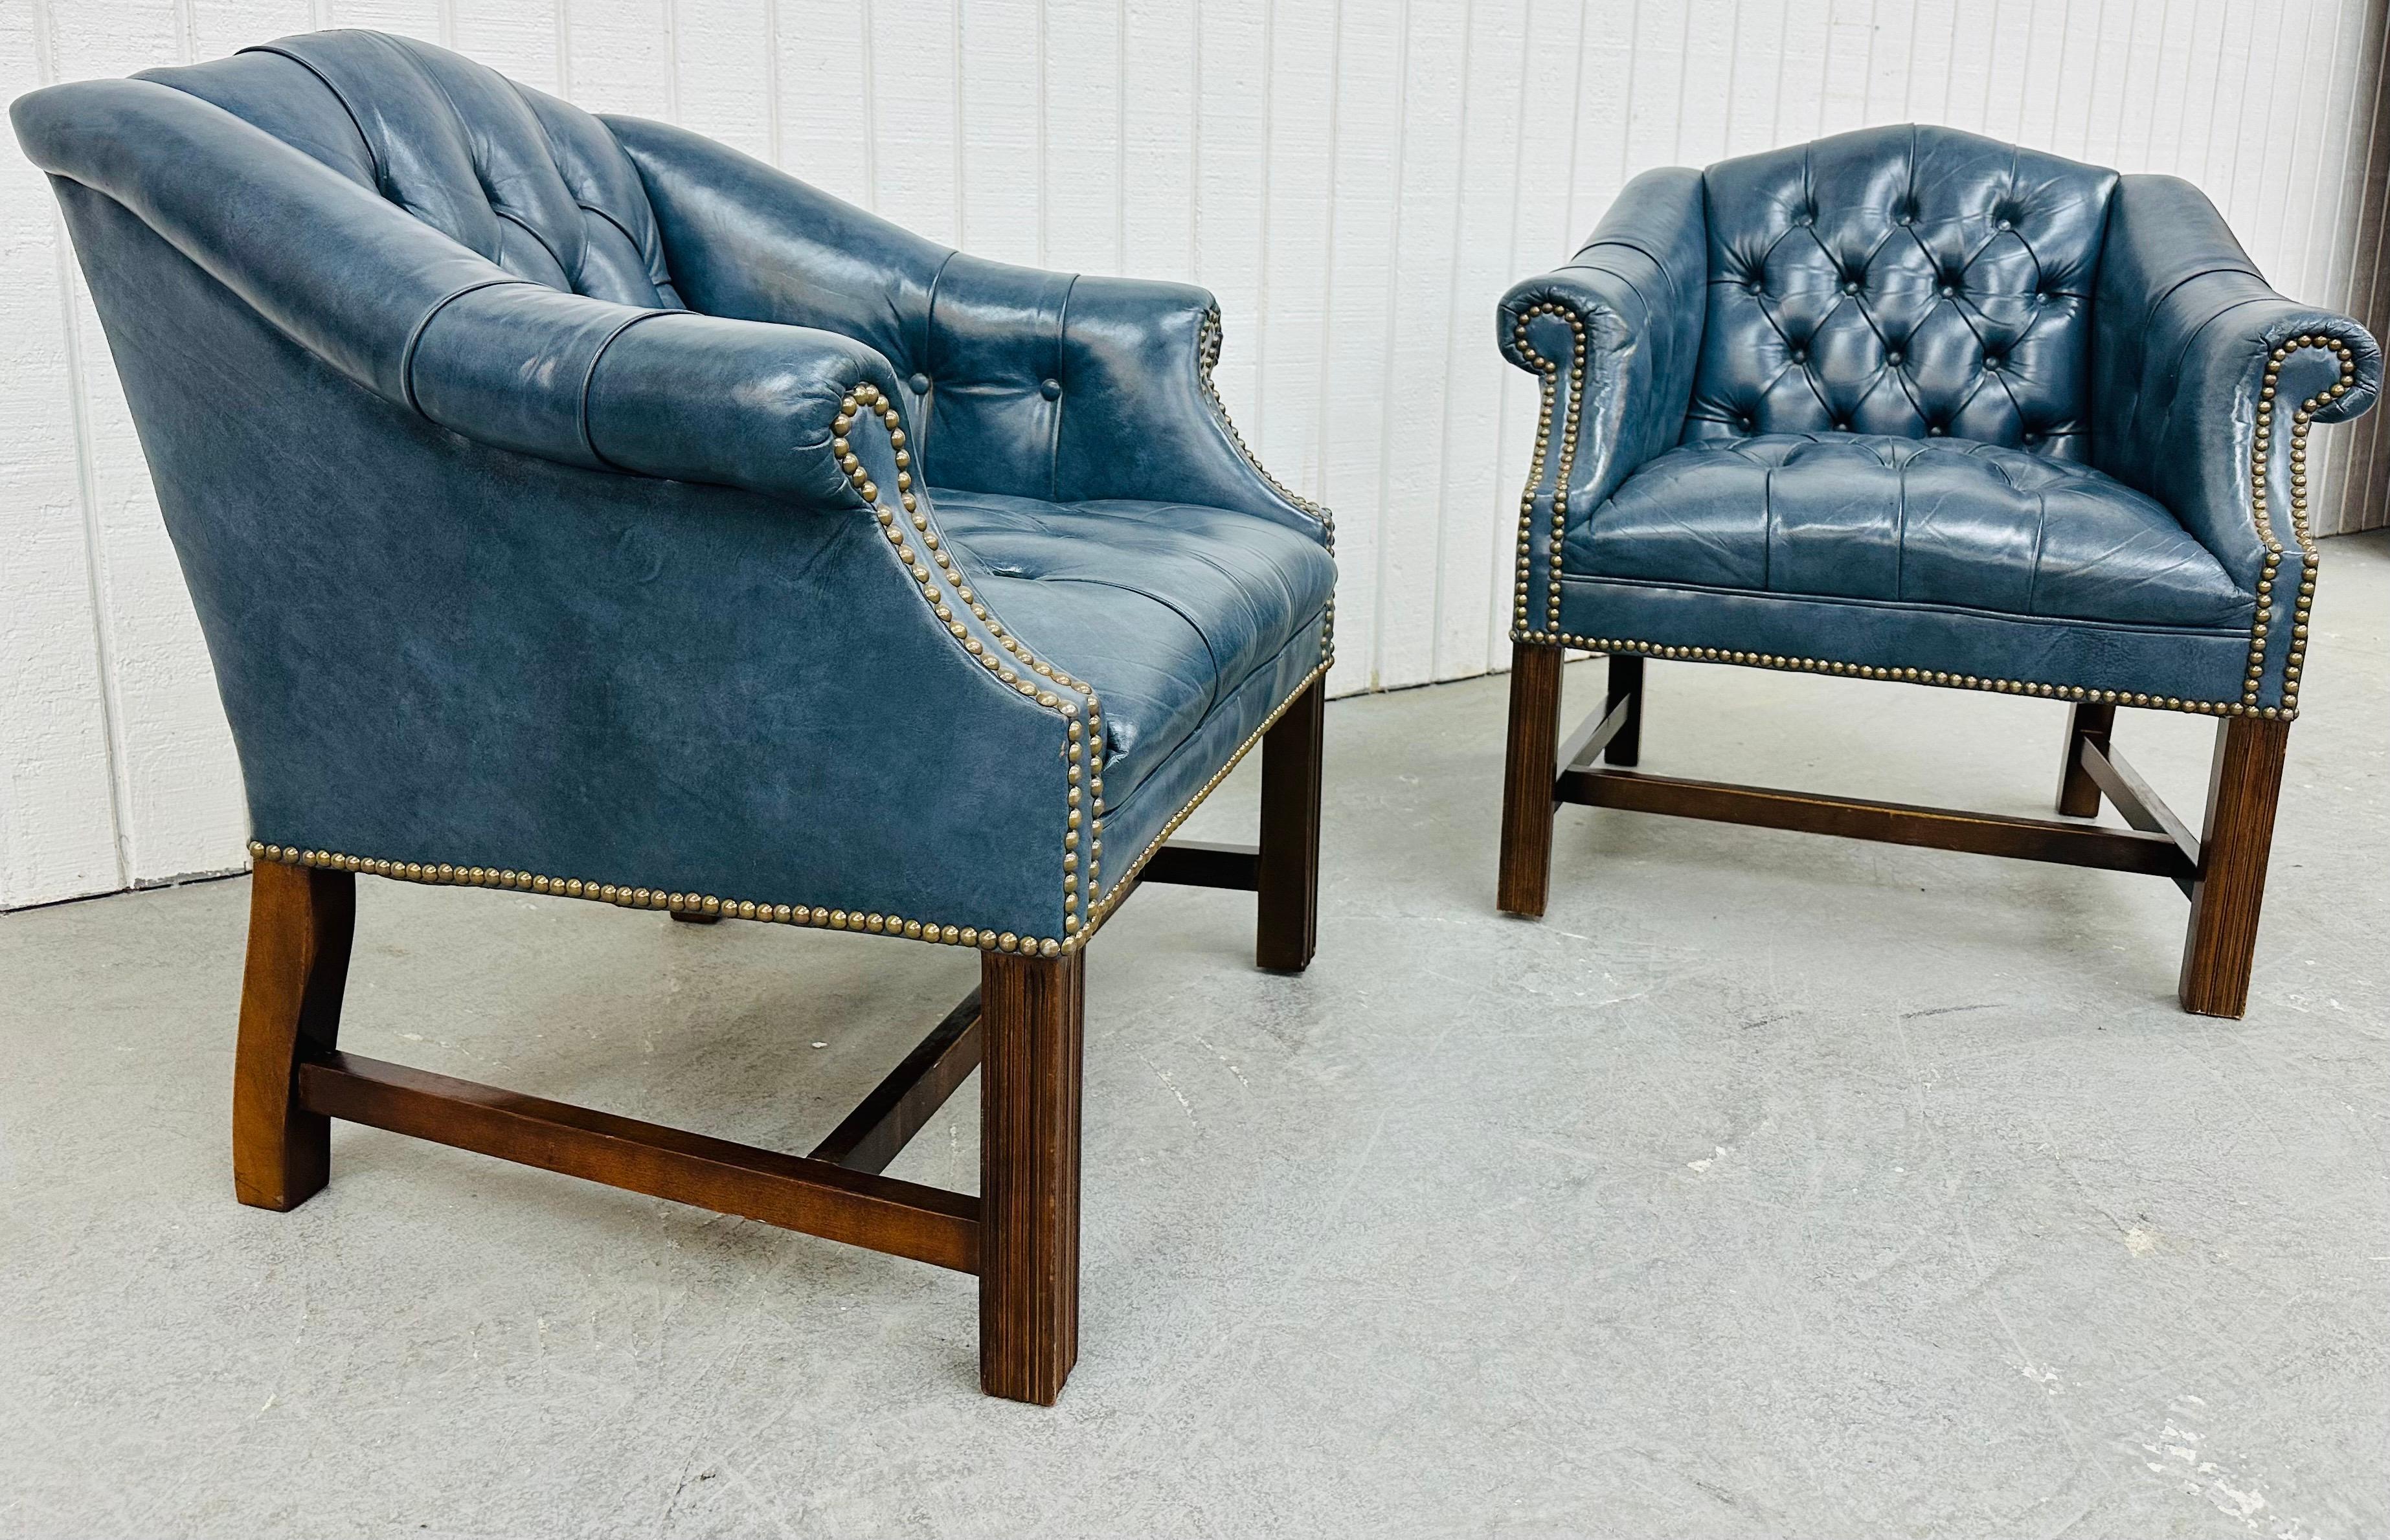 This listing is for a pair of Vintage Blue Chesterfield Arm Chairs. Featuring a chesterfield style design, nailhead trim, mahogany legs, and a beautiful blue leather upholstery. This is an exceptional combination of quality and design!